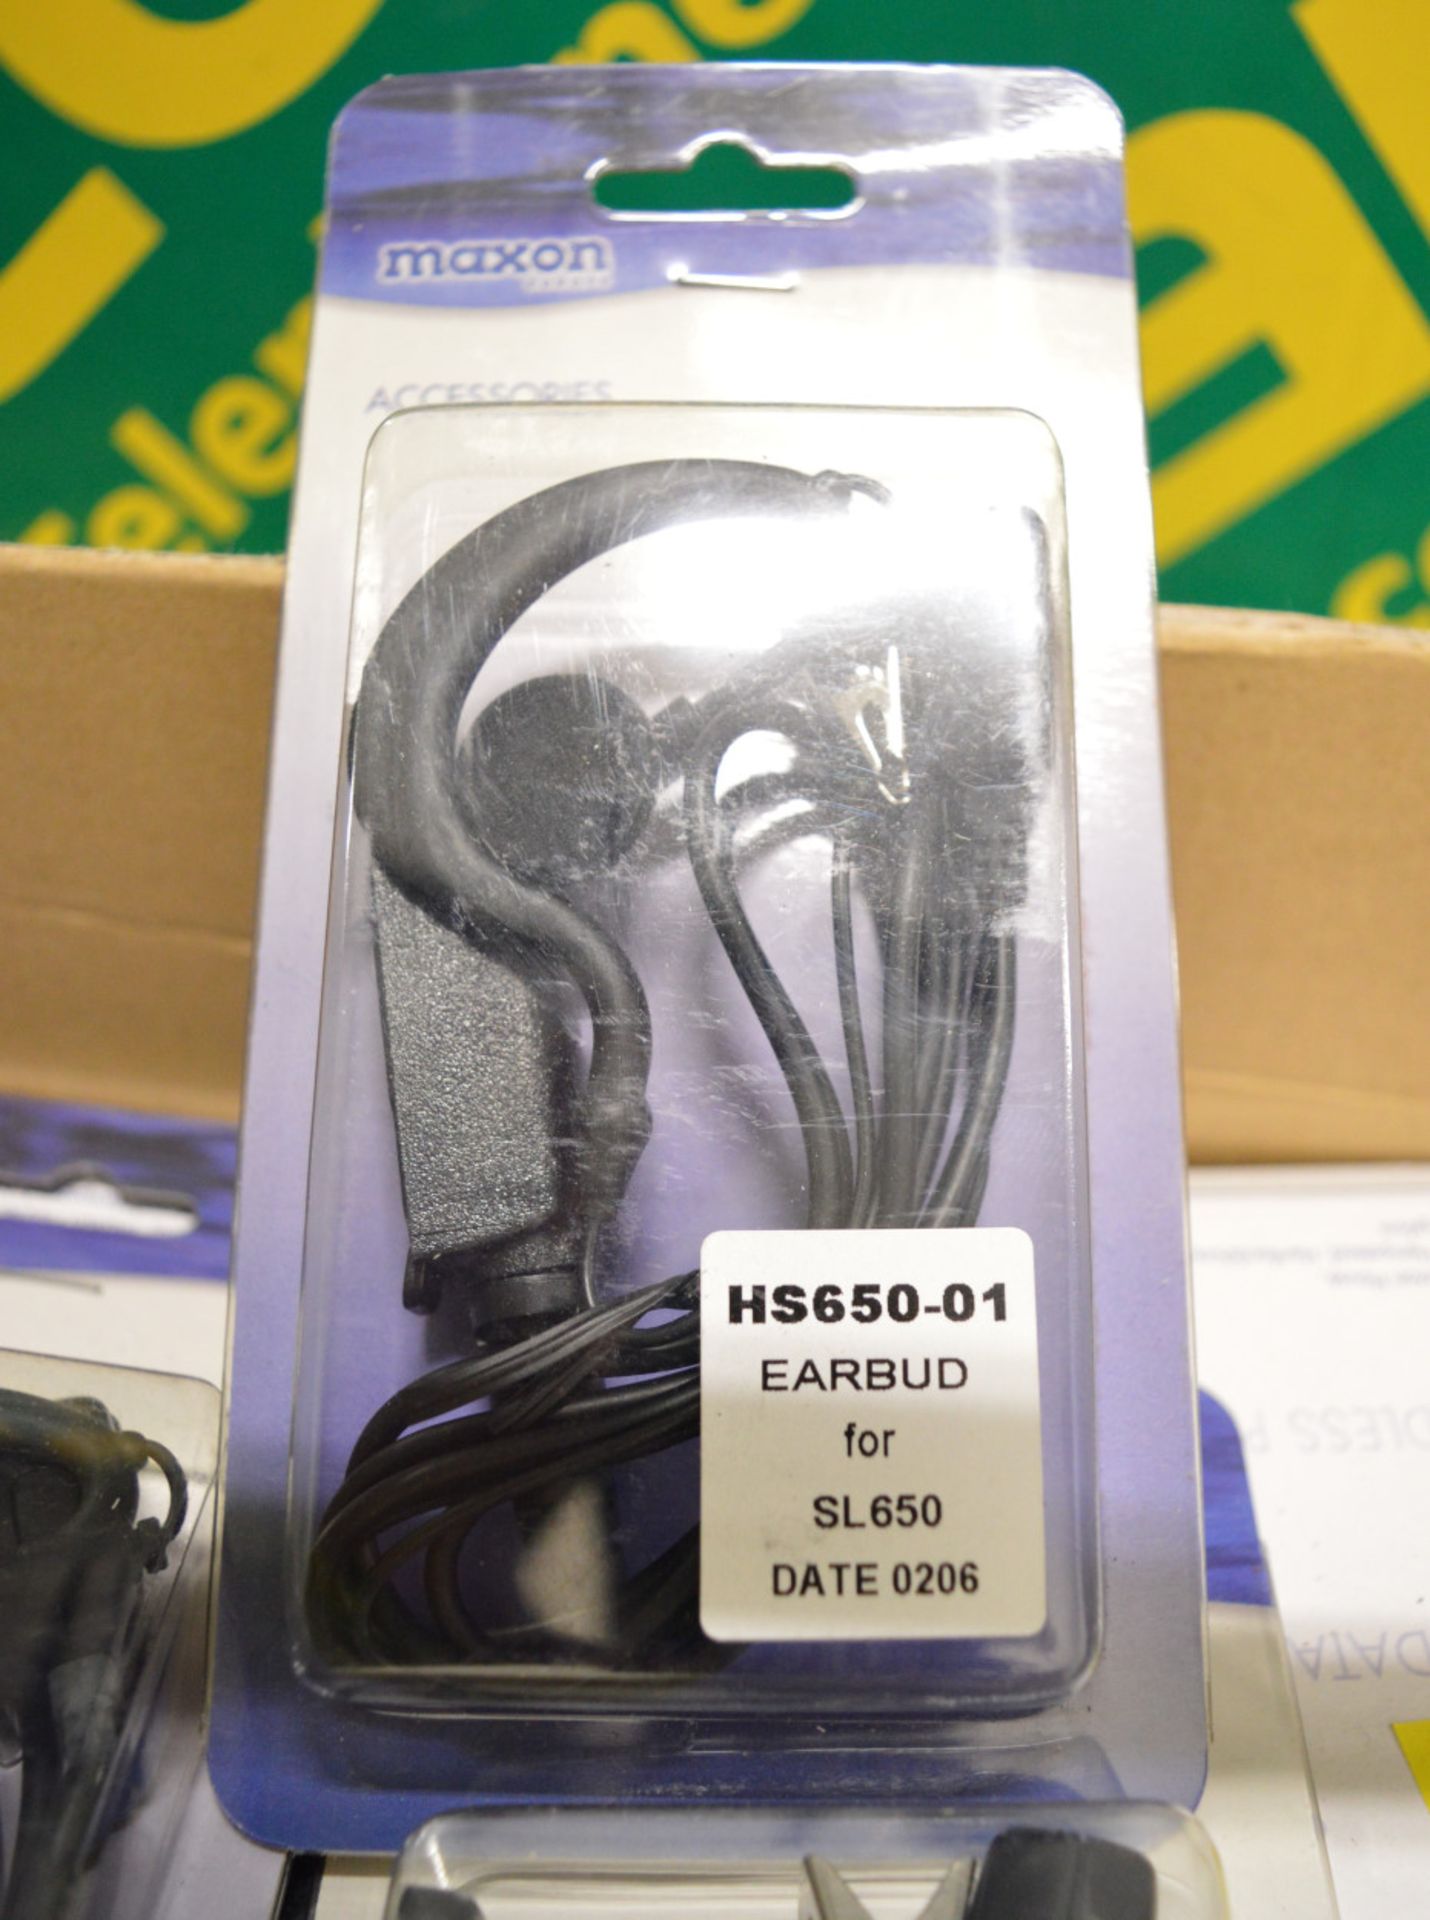 Approx 19x Maxon HS650-01 Earbud for SL650 - Image 2 of 2